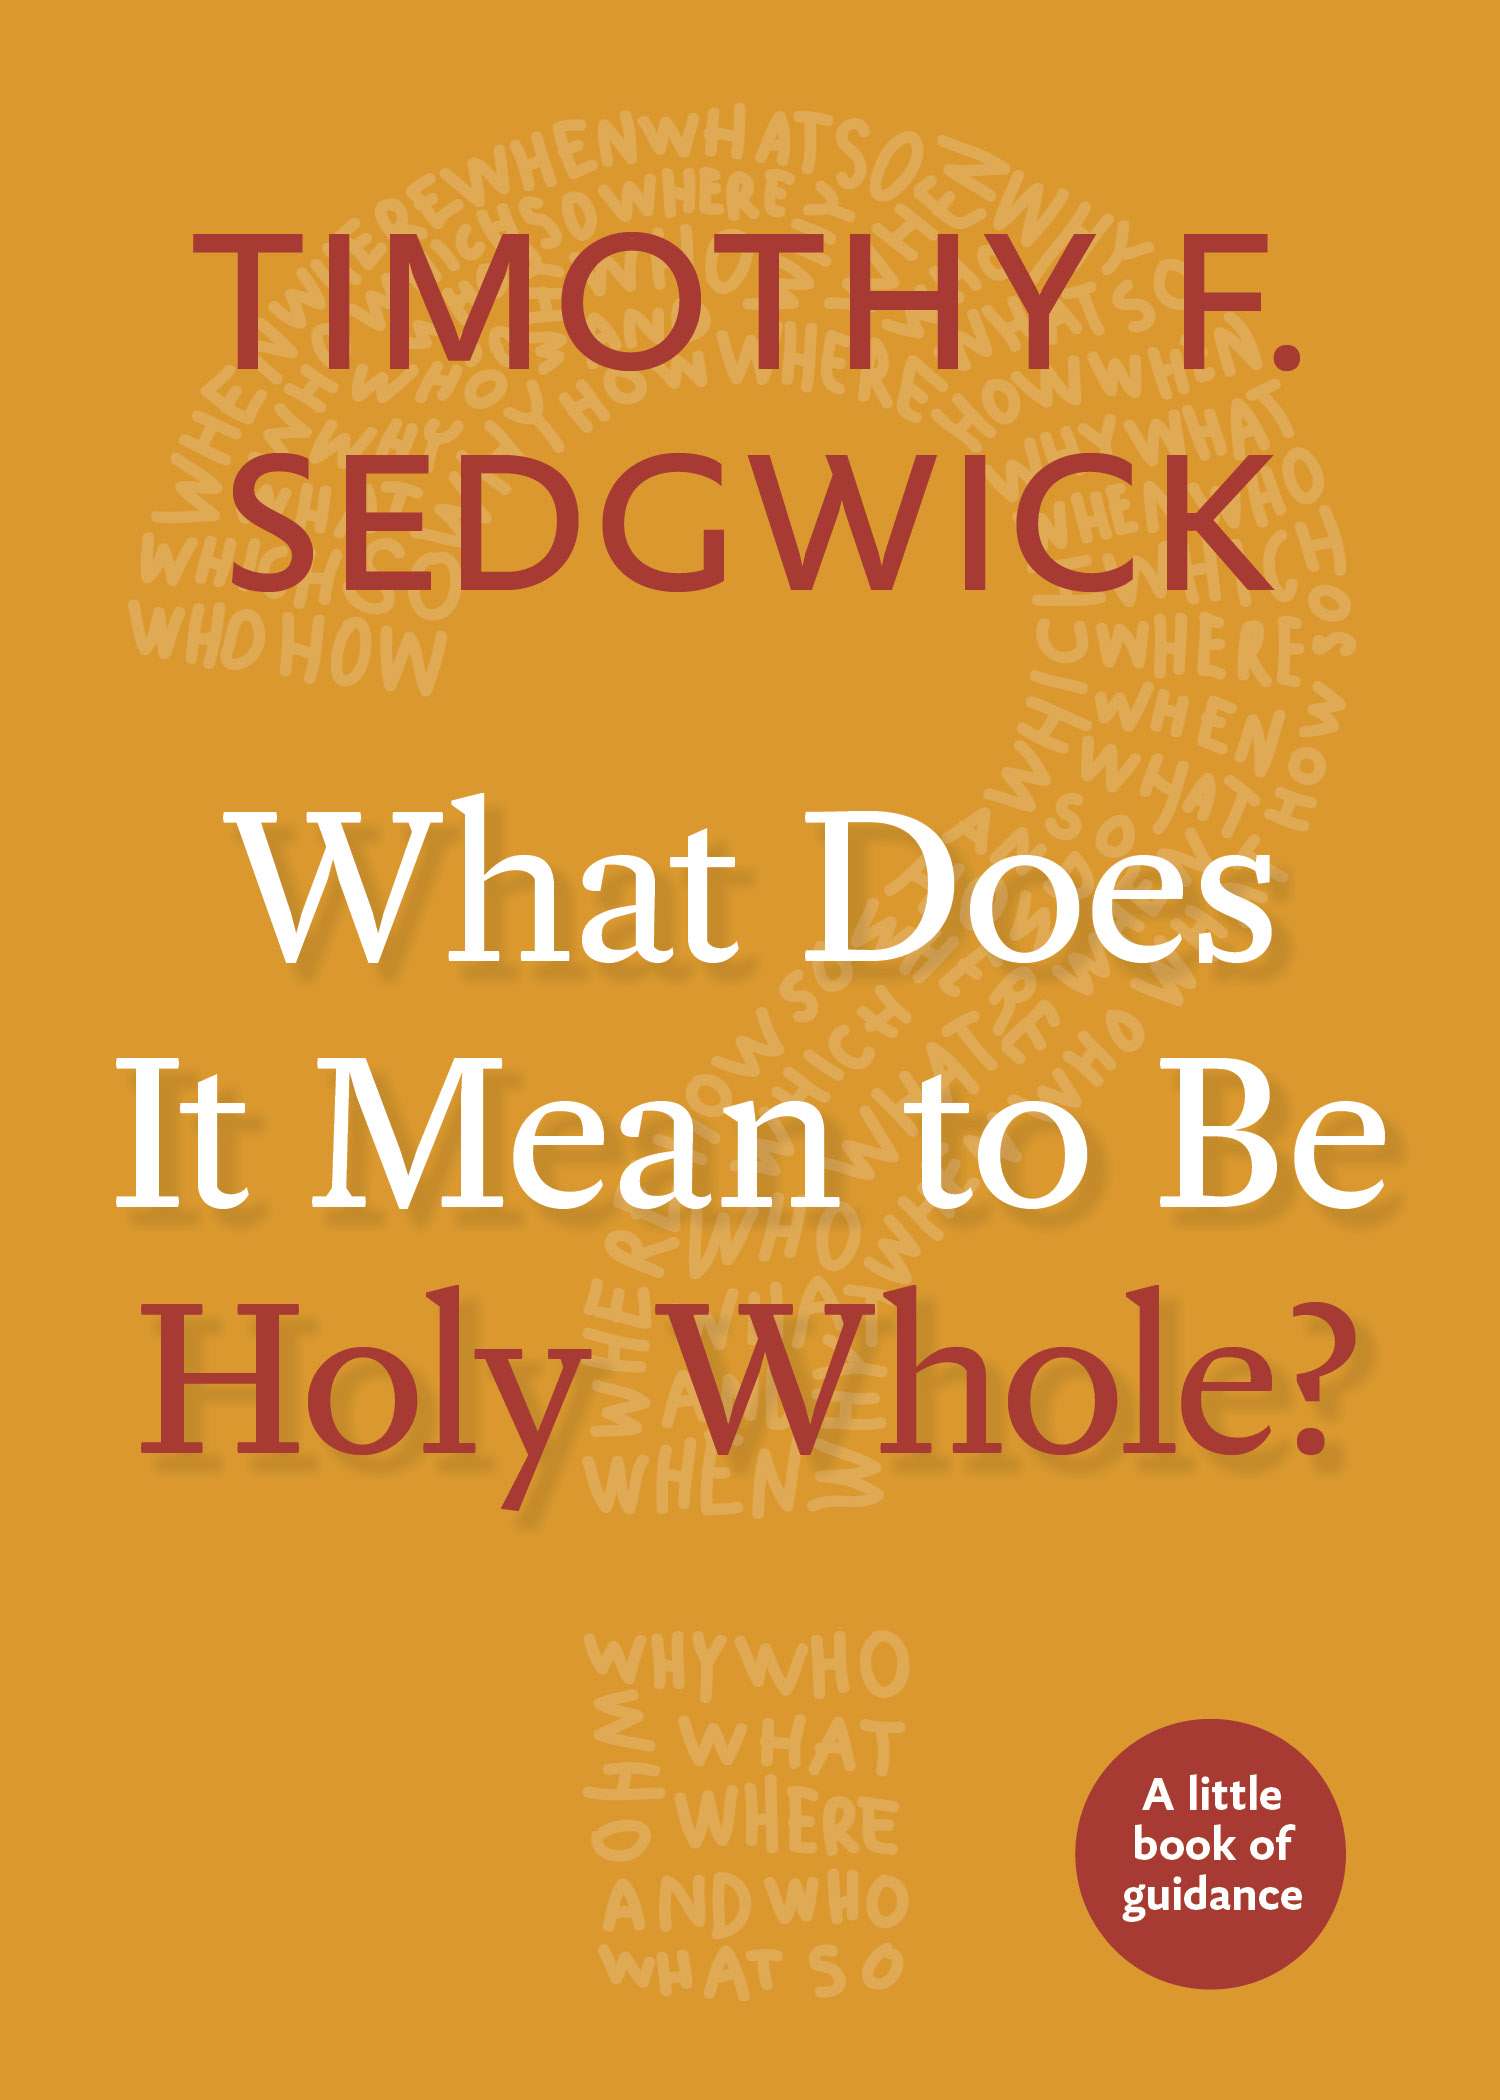 ChurchPublishing.org: What Does It Mean to Be Holy Whole?